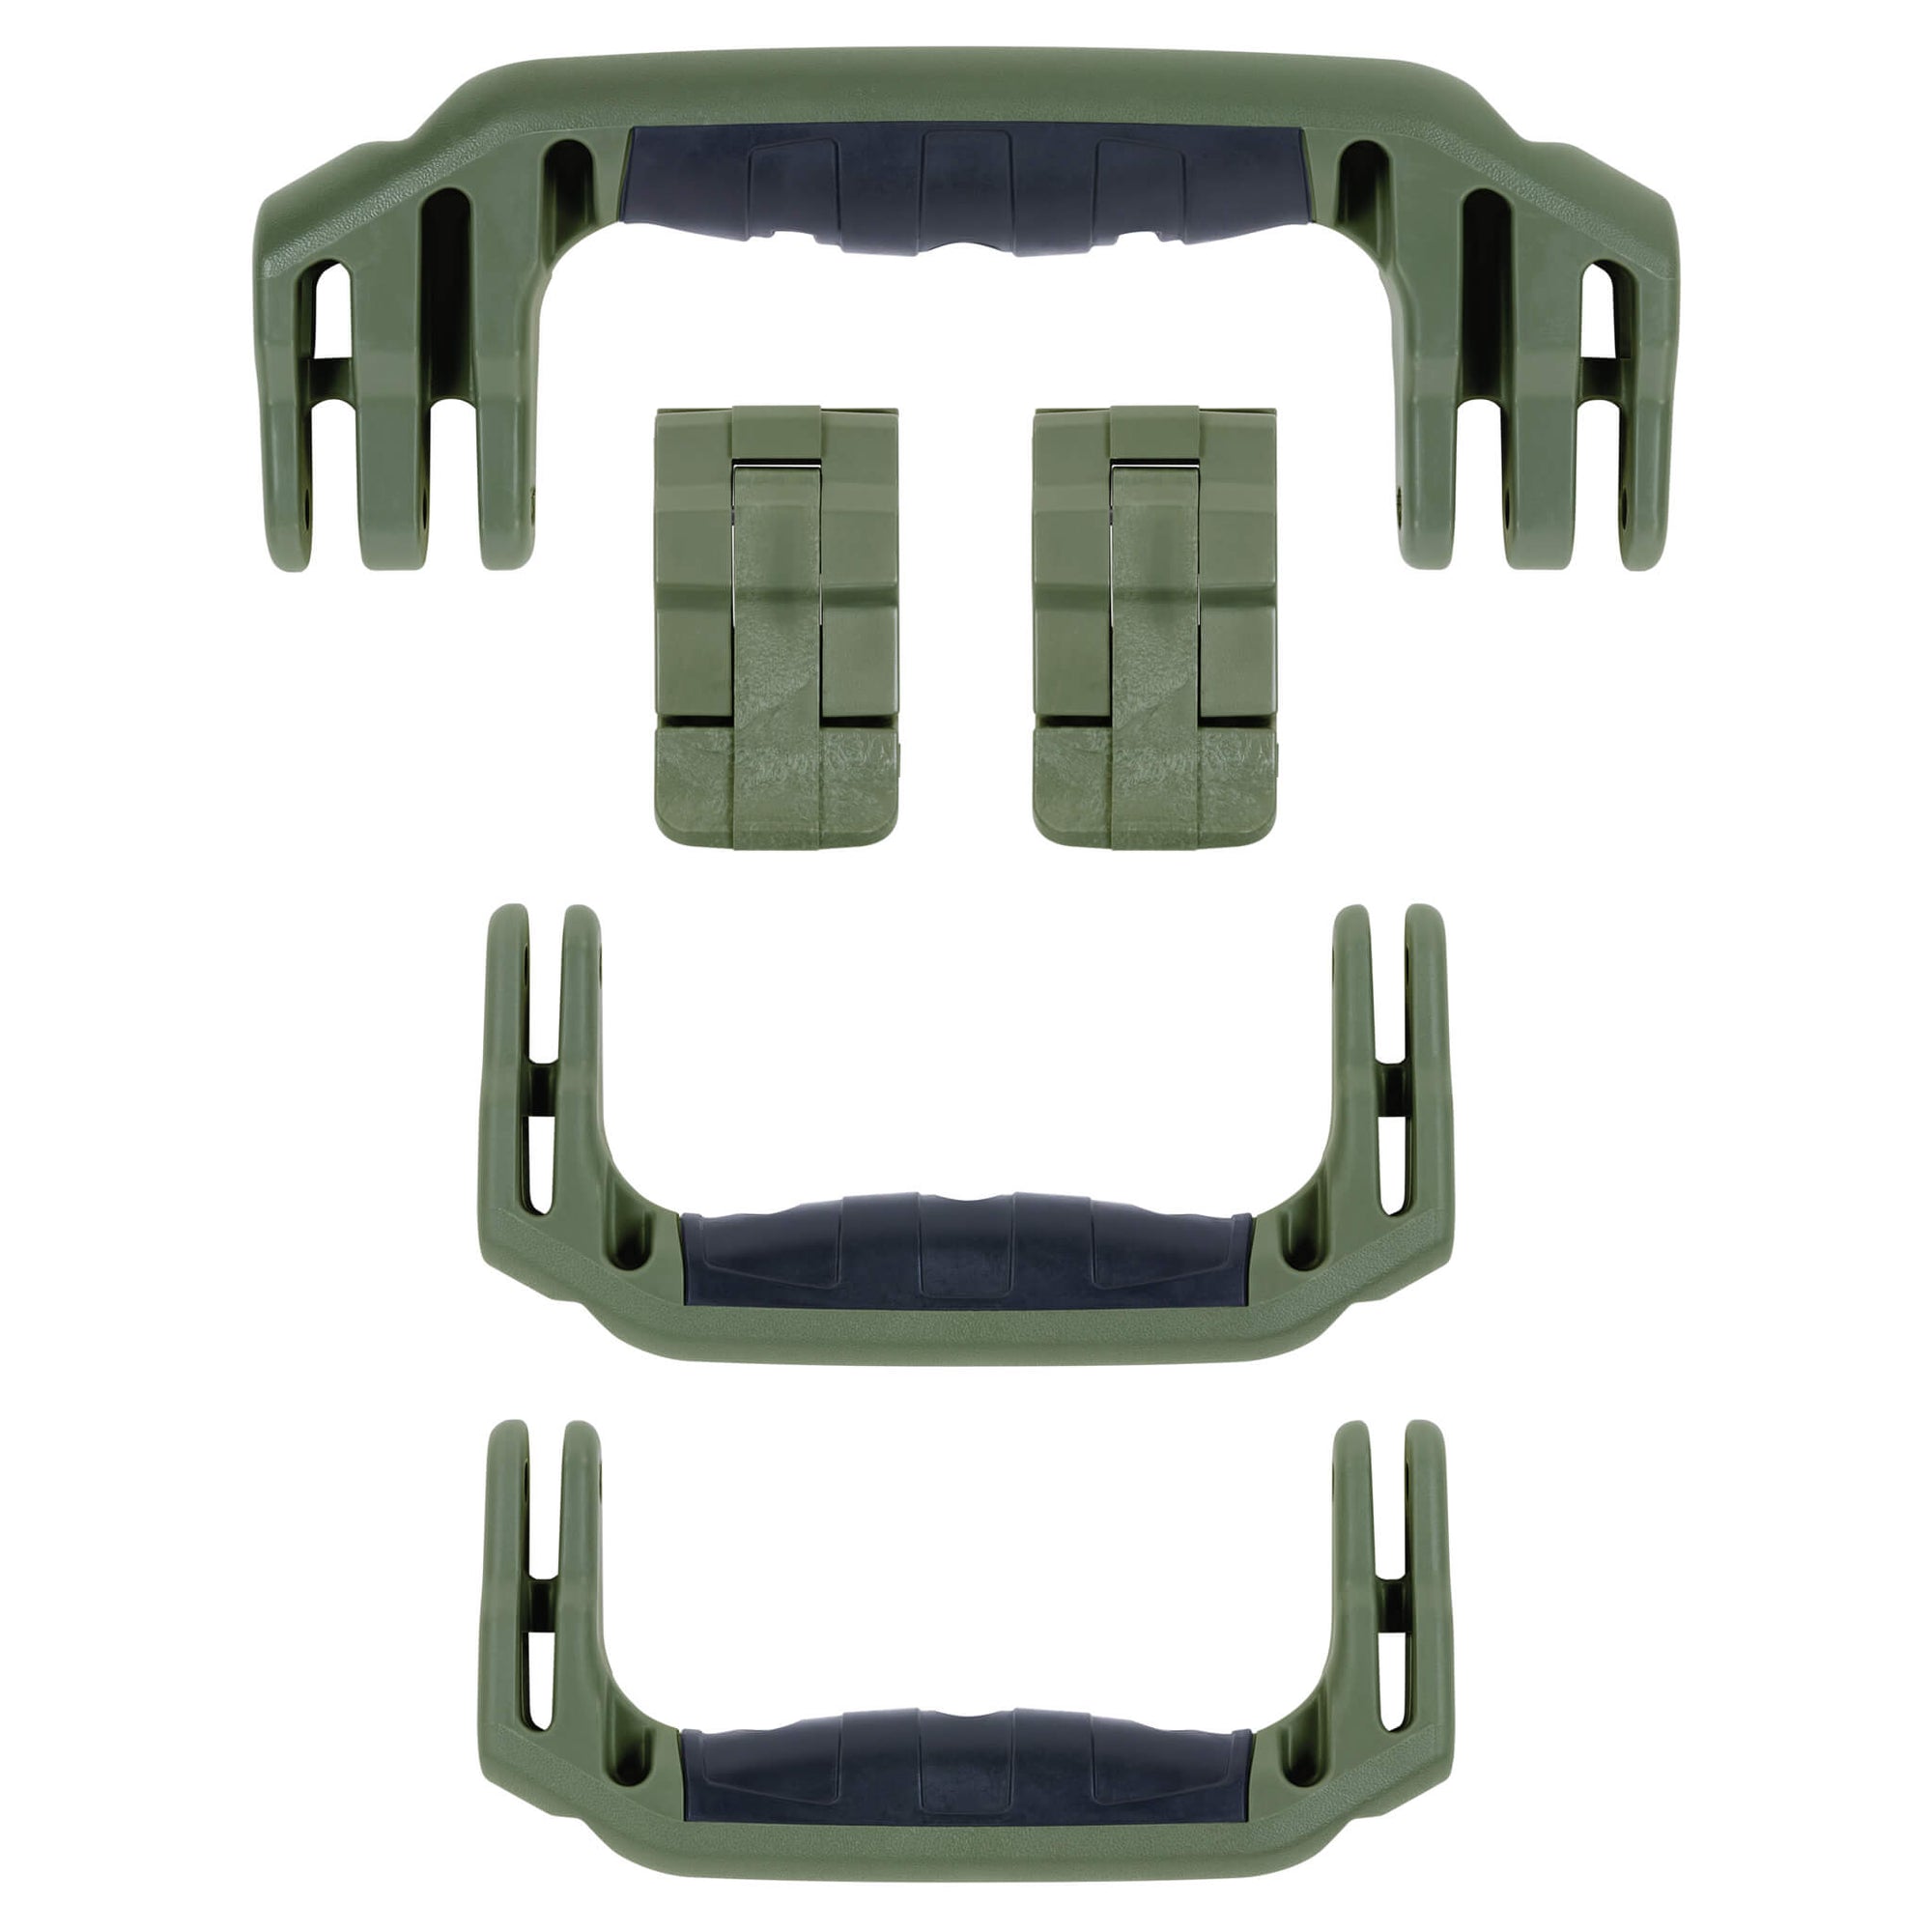 Pelican 1440 Replacement Handles & Latches, OD Green (Set of 3 Handles, 2 Latches) ColorCase 